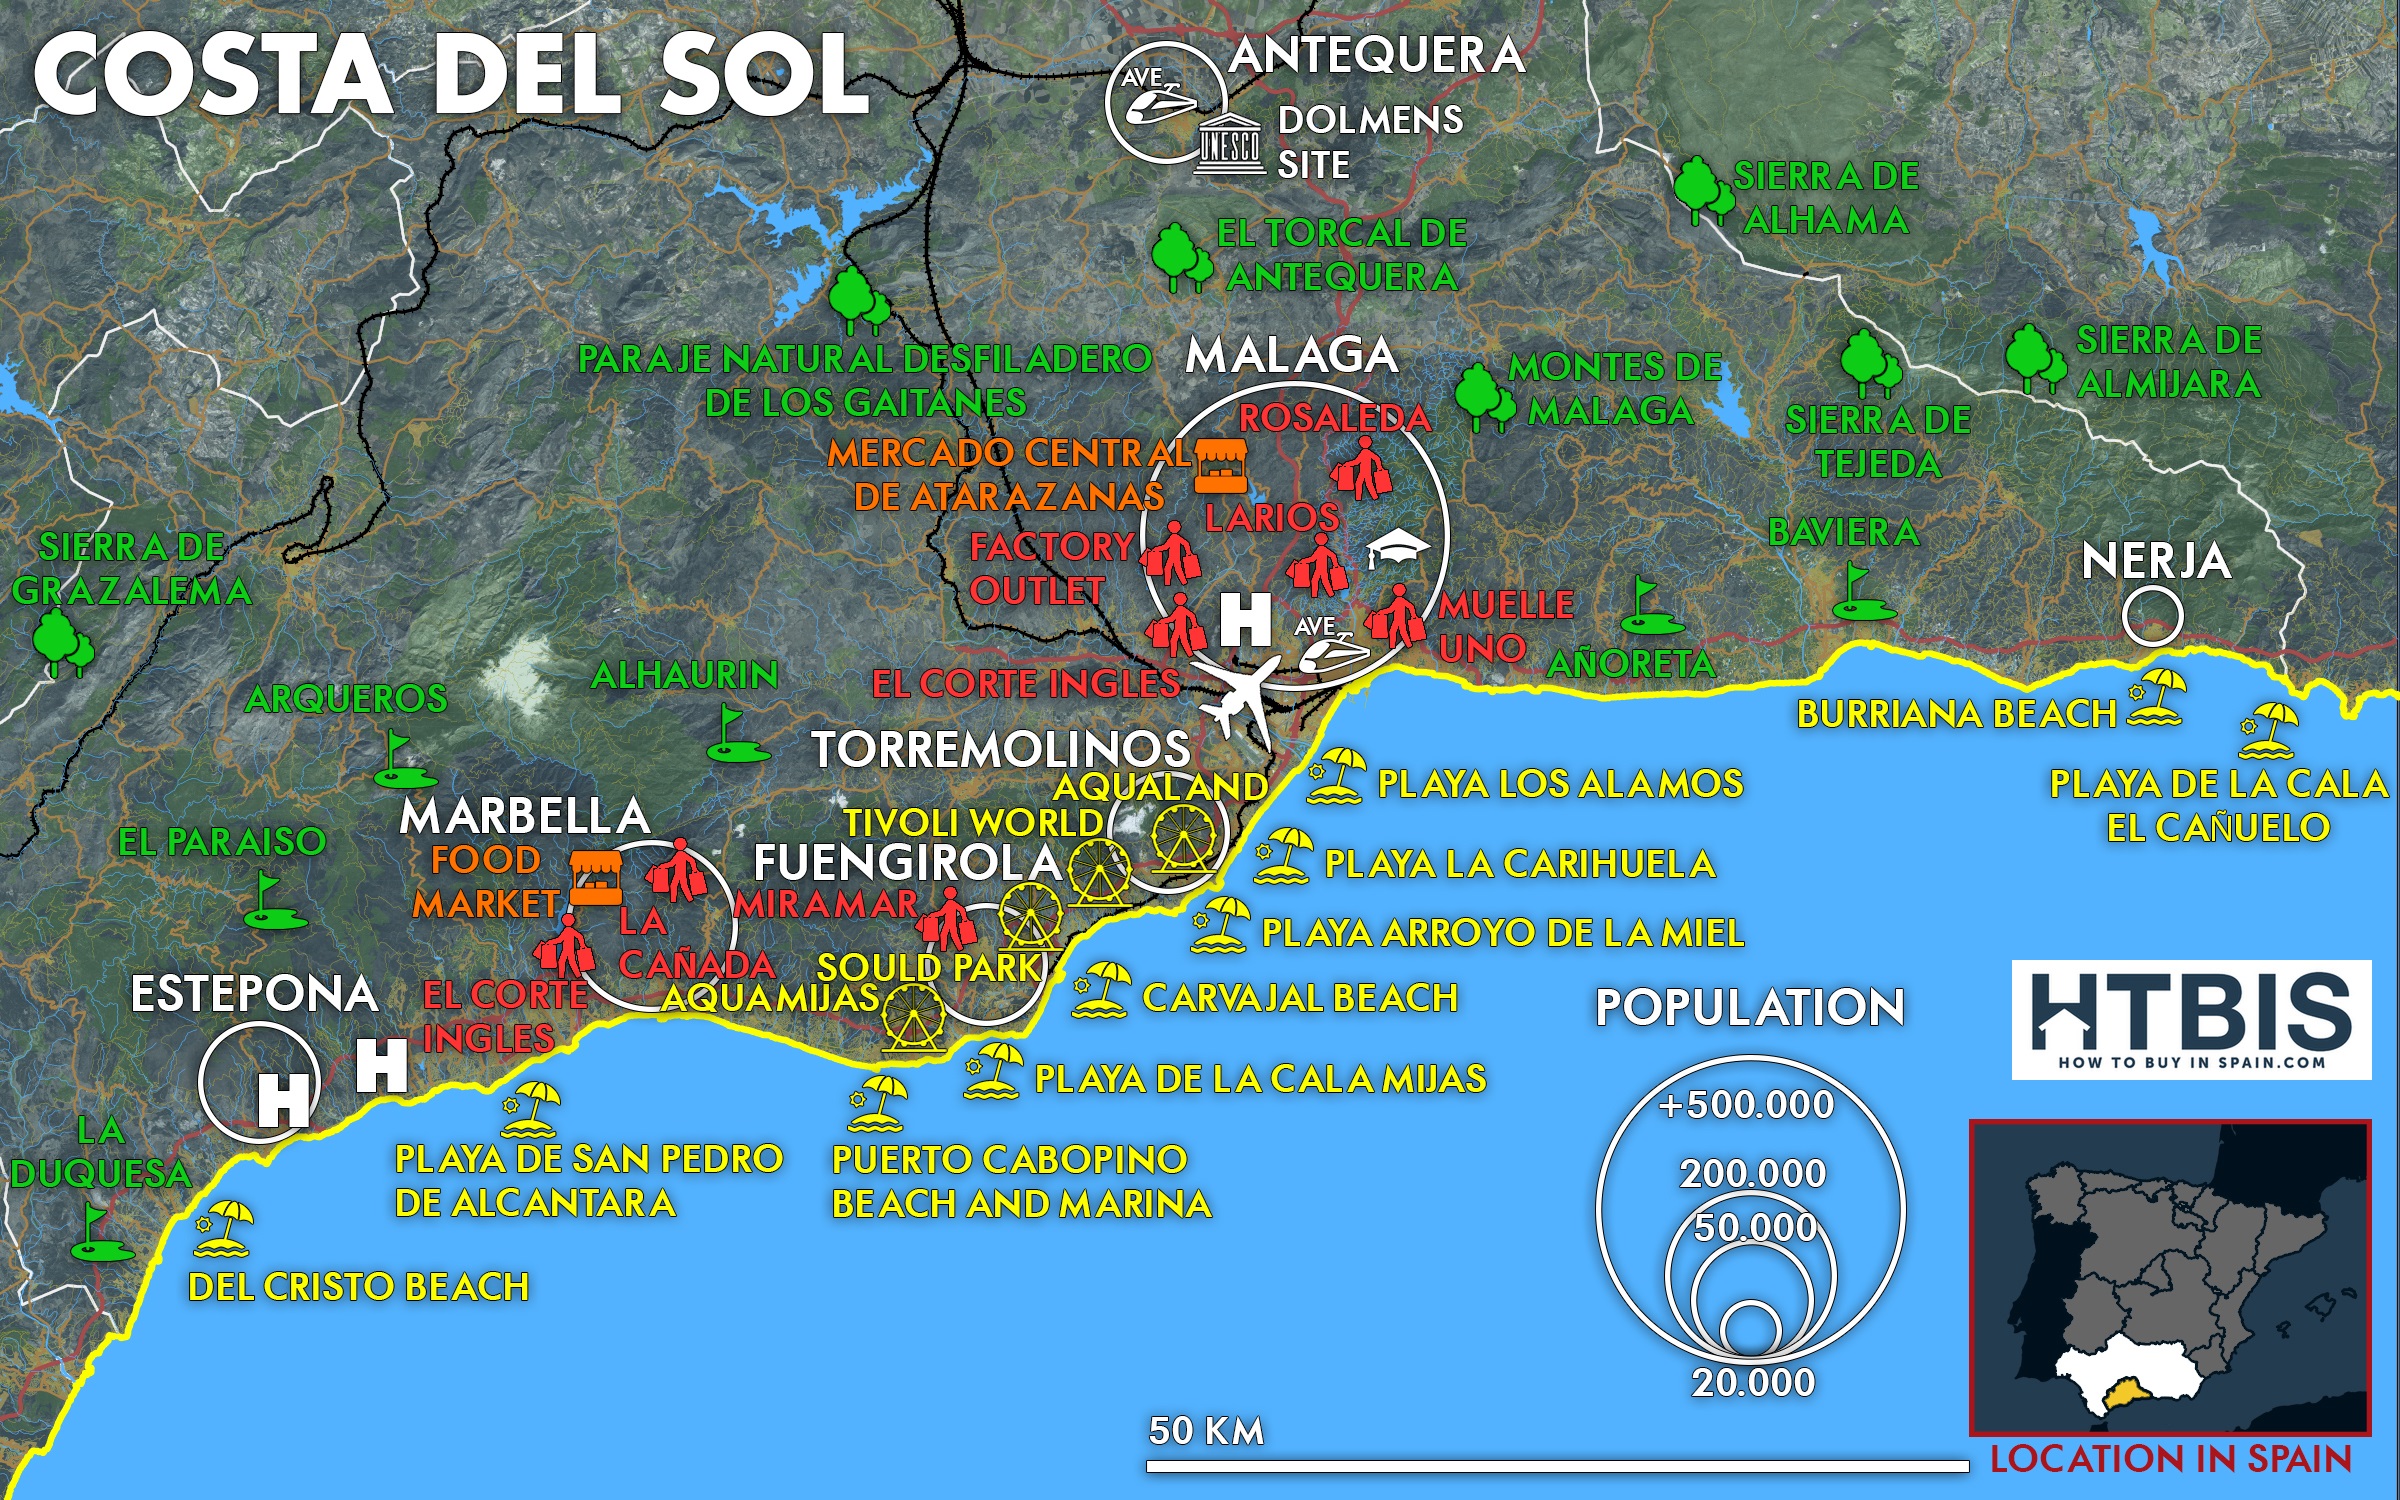 Find all the useful information on the Costa del Sol